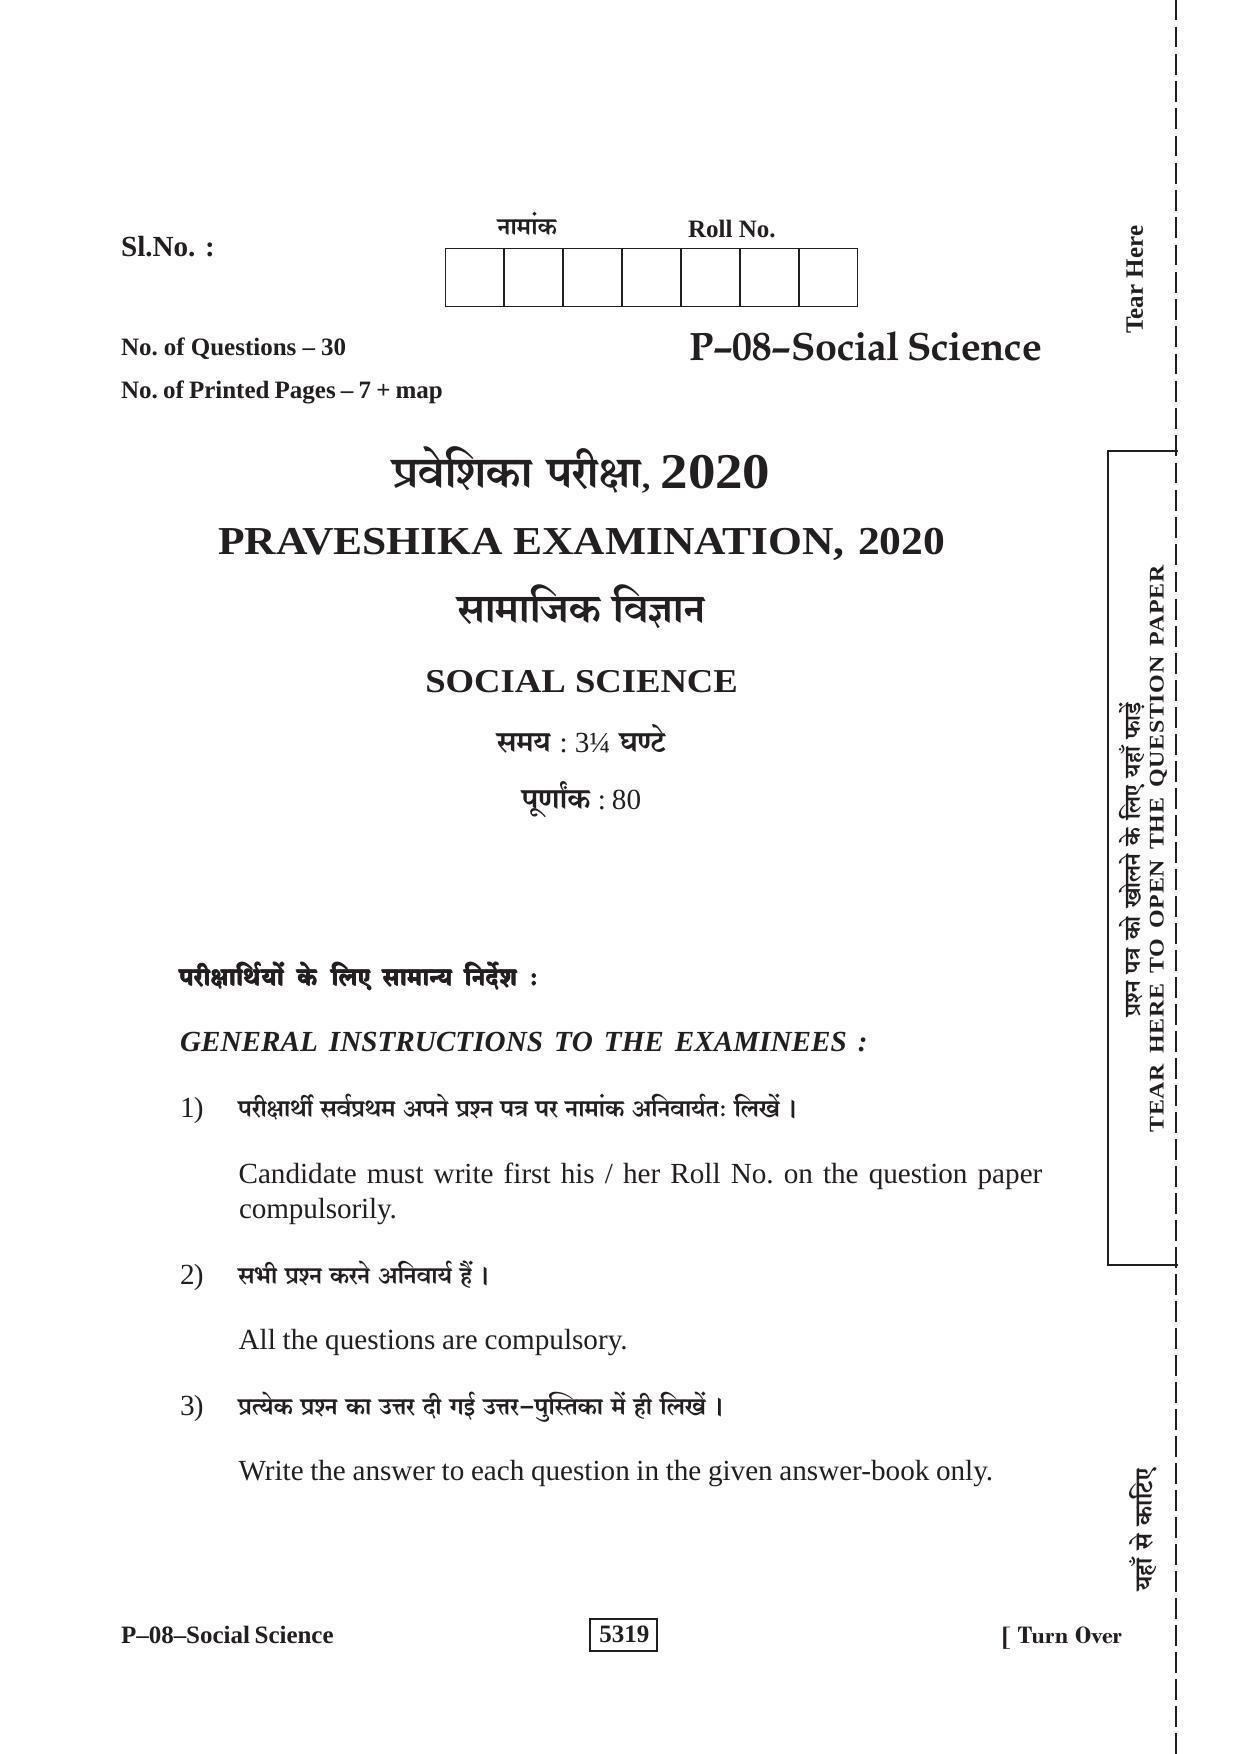 RBSE 2020 Social Science Praveshika Question Paper - Page 1